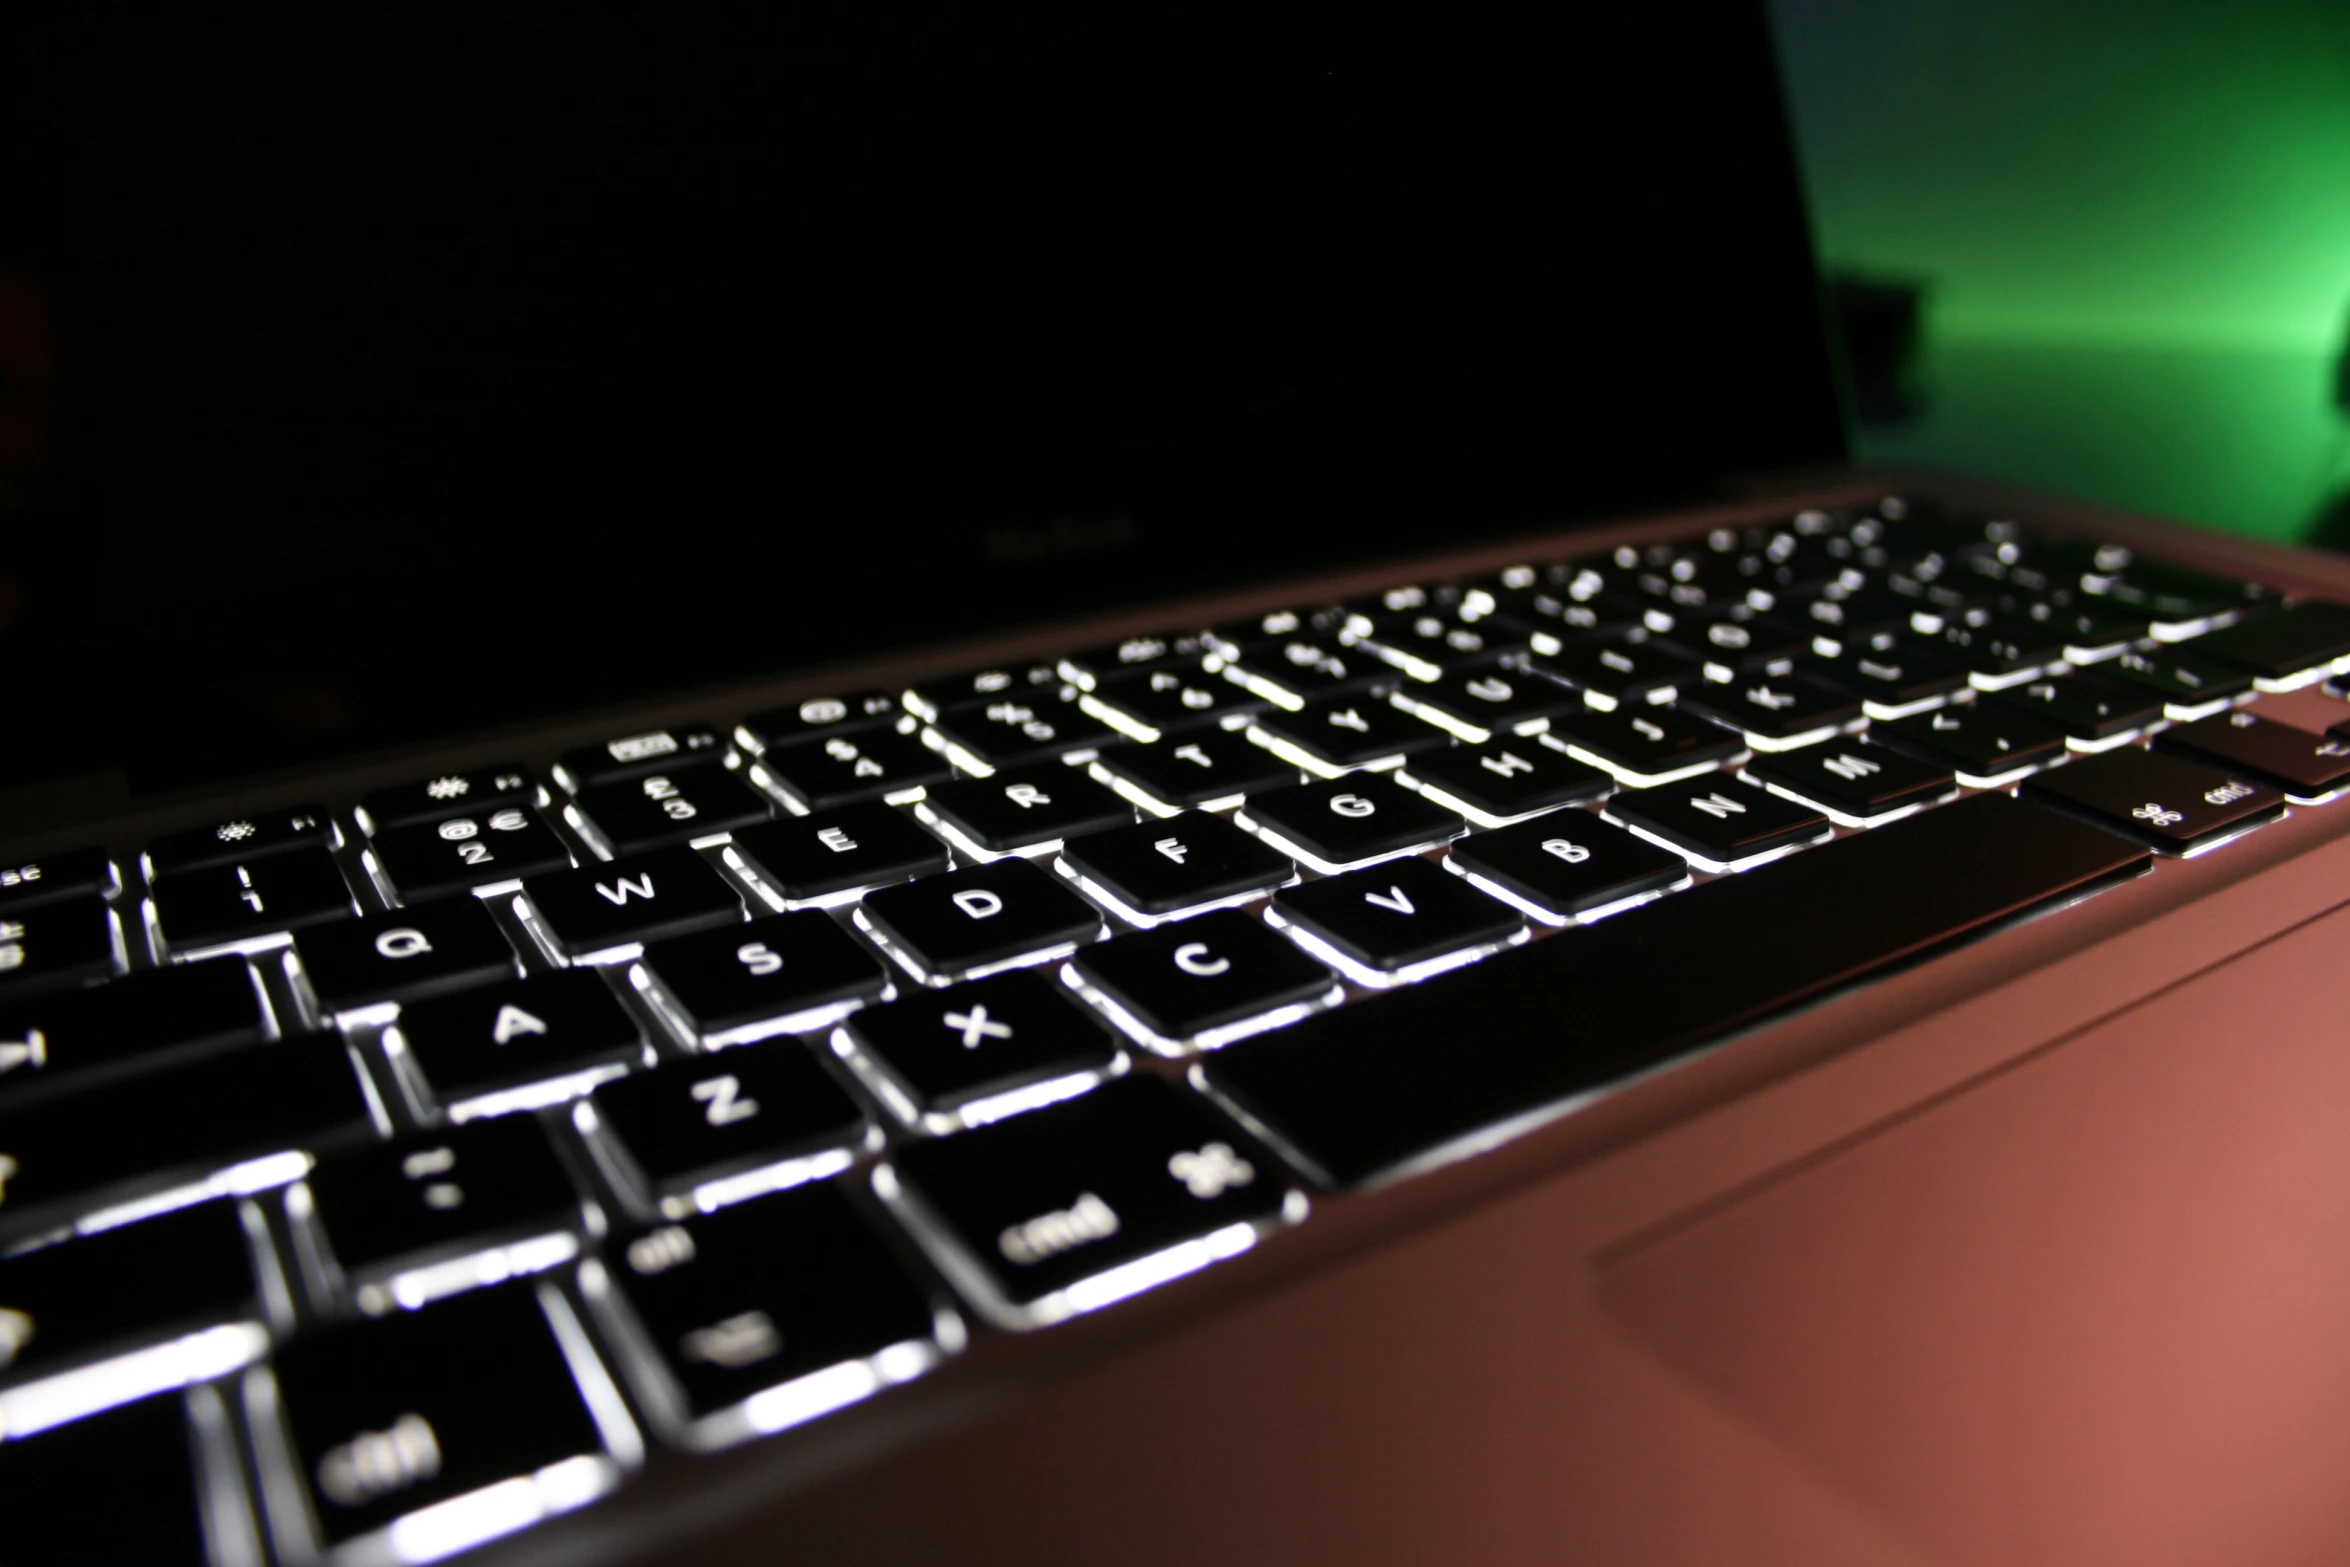 this is an image of the backlit keyboard of a laptop